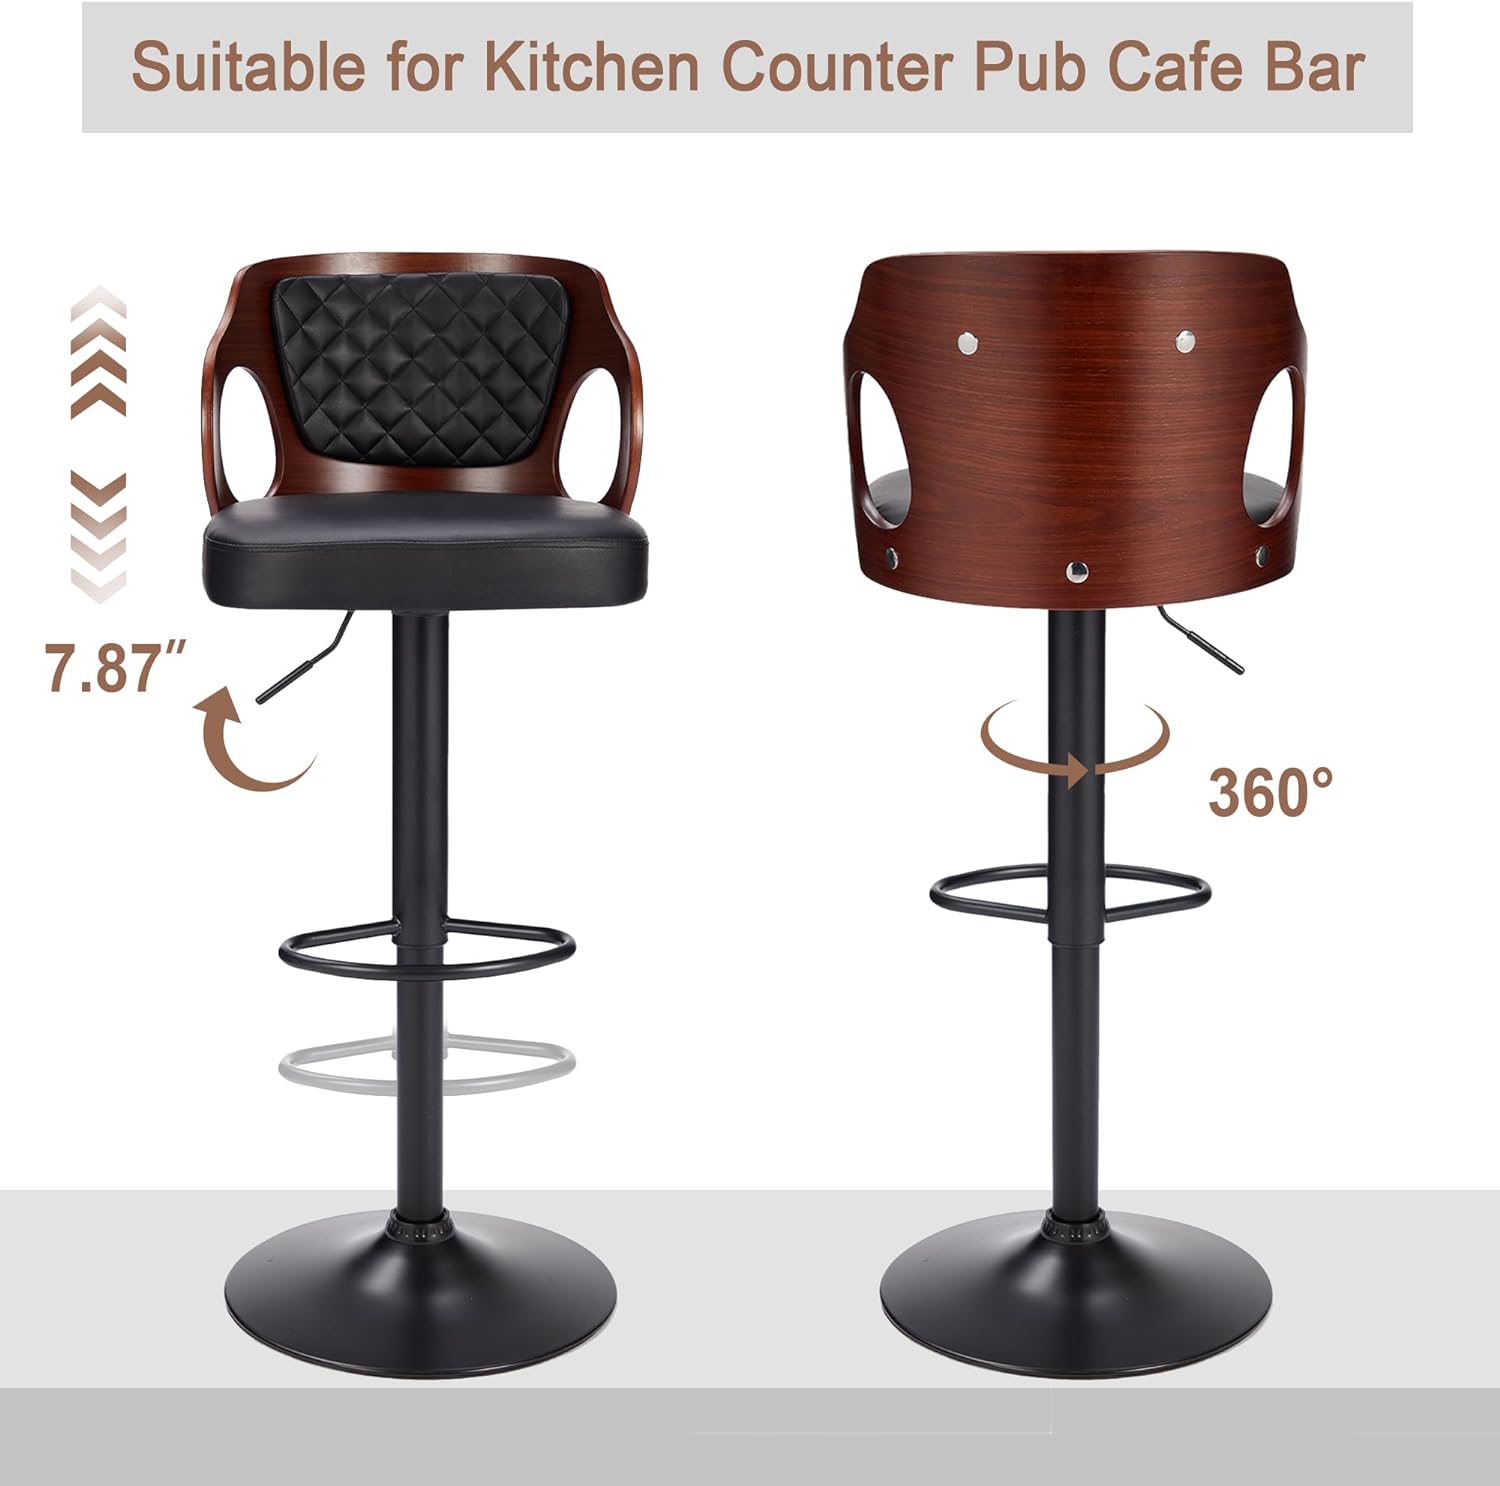 VECELO Bar Stool Set of 2, Counter Height Stools with Bentwood Back